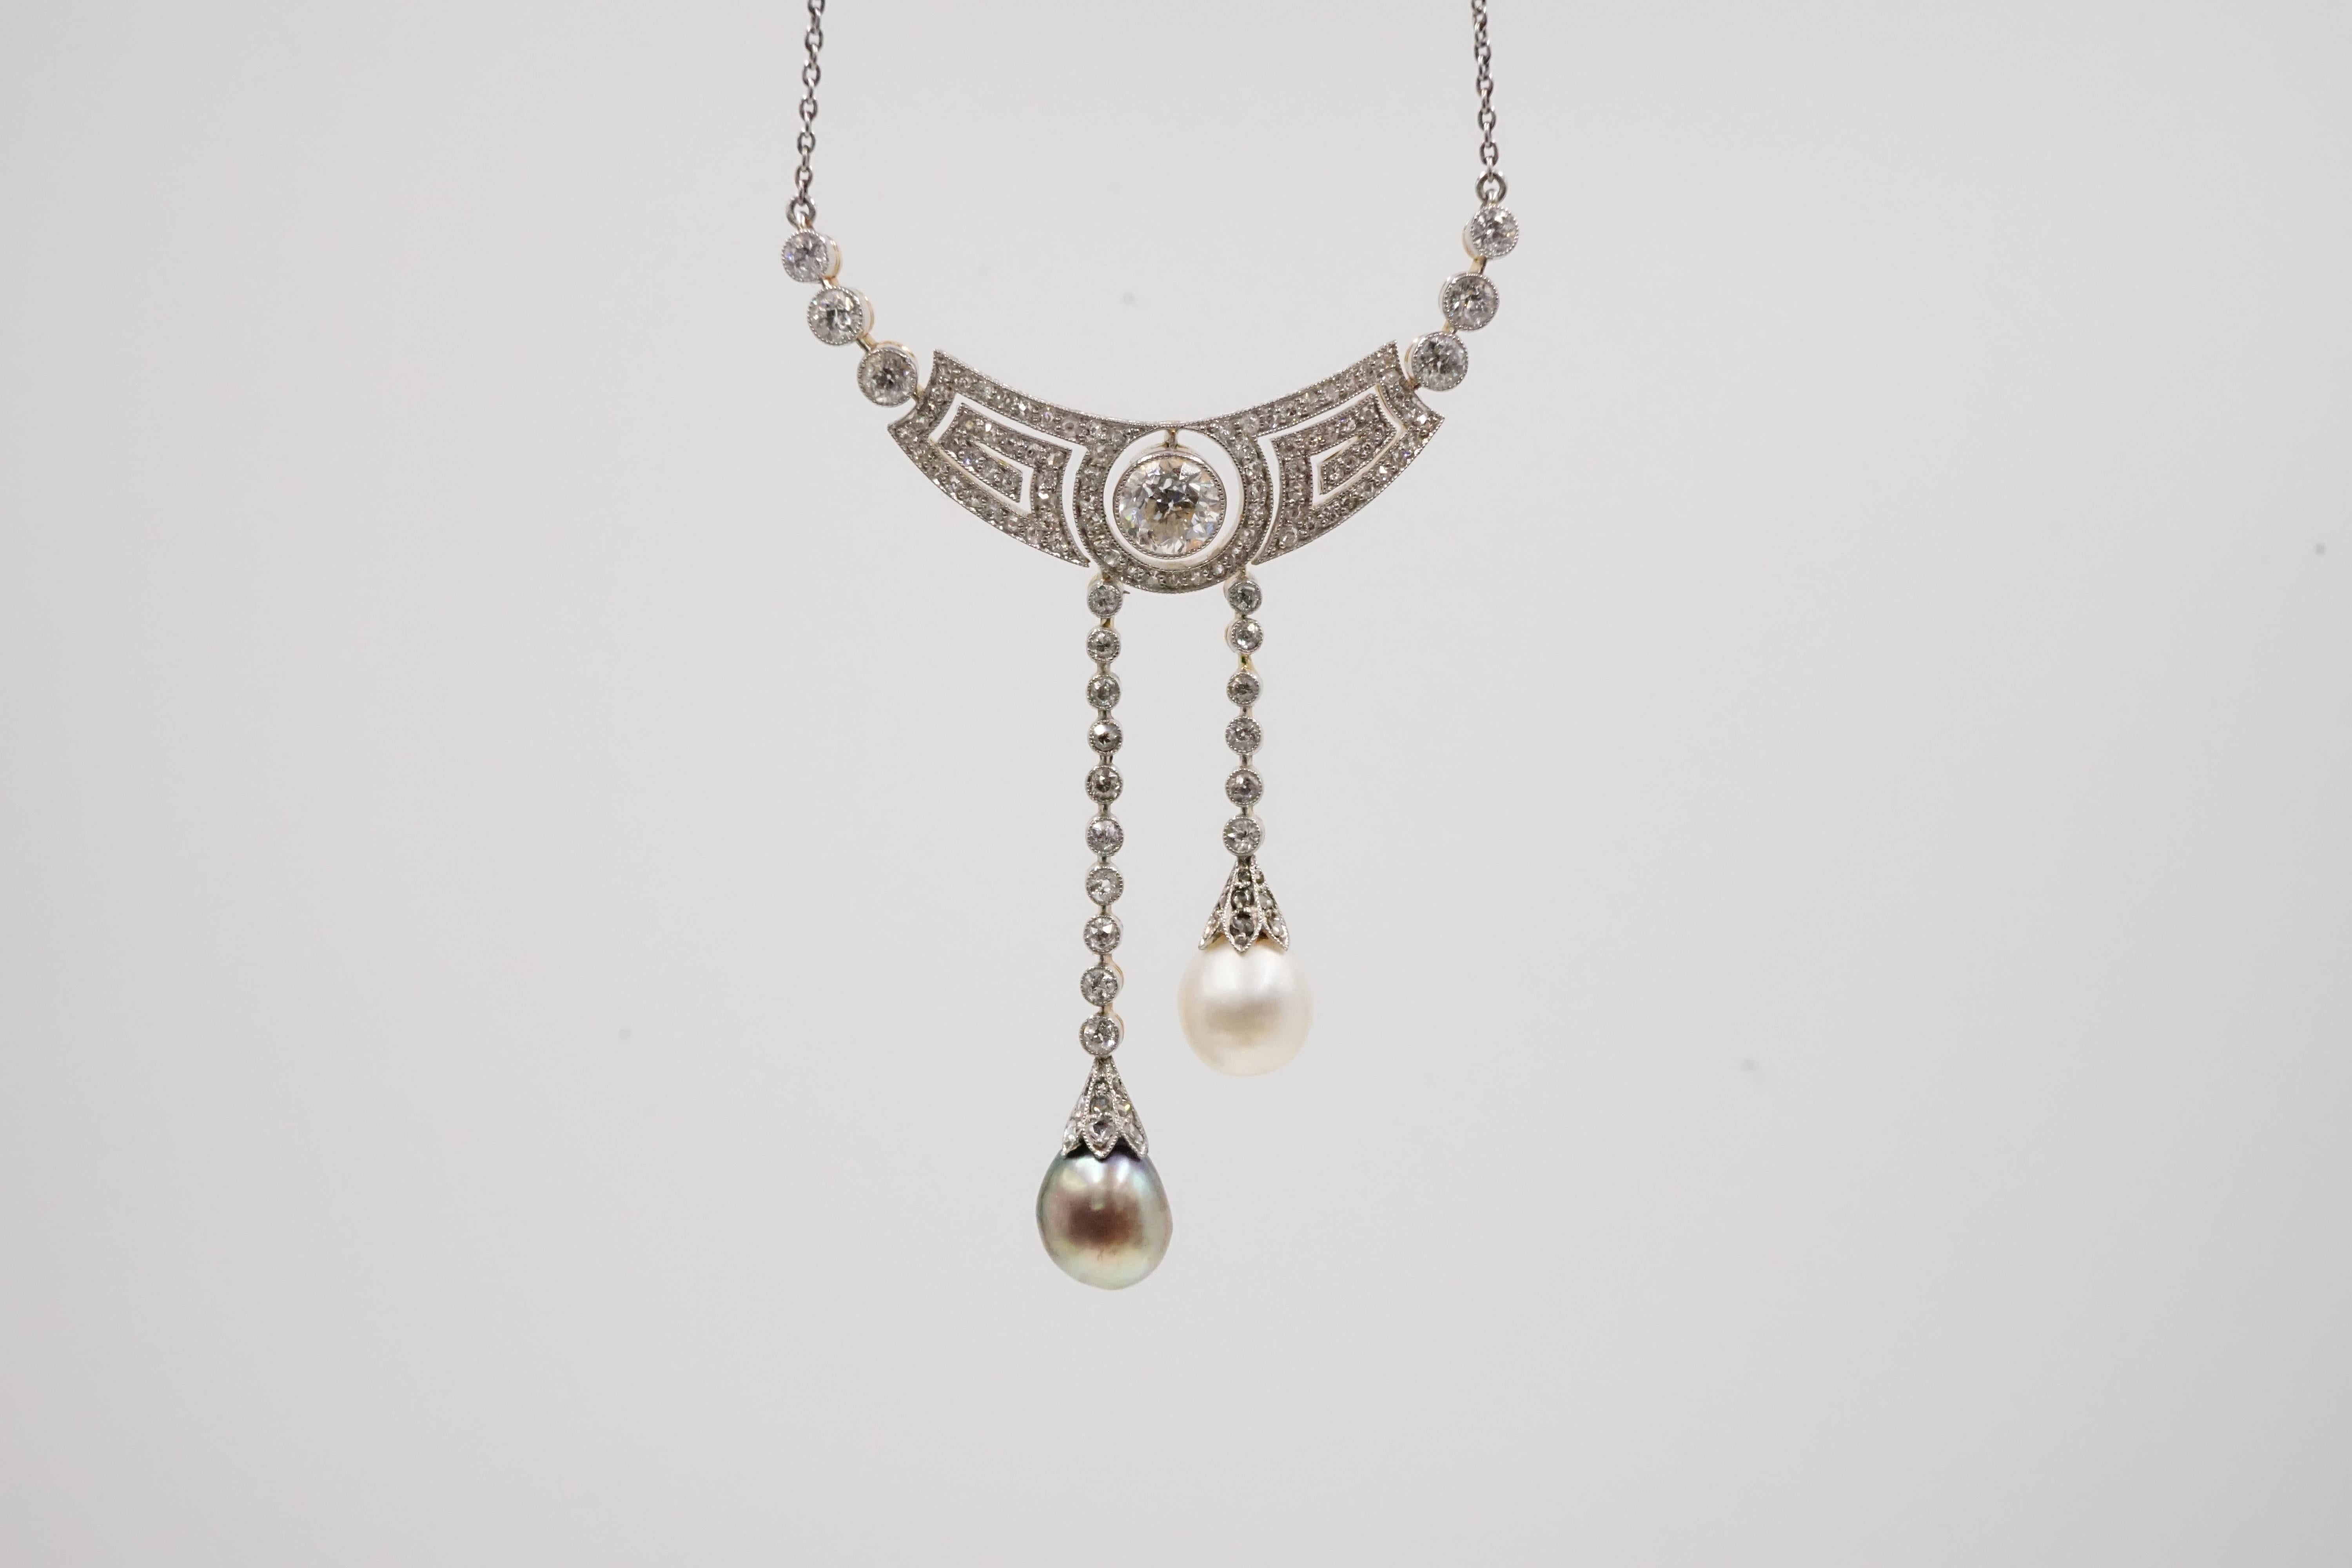 An Art Deco Natural Pearl and Diamond Necklace with cert and Original Box.

Platinum on gold, engravings on the side of this piece shows the attention to details when designing it. company E. Netter & Cie., Hof Juweliere, Mannheim (E. Netter & Cie.,